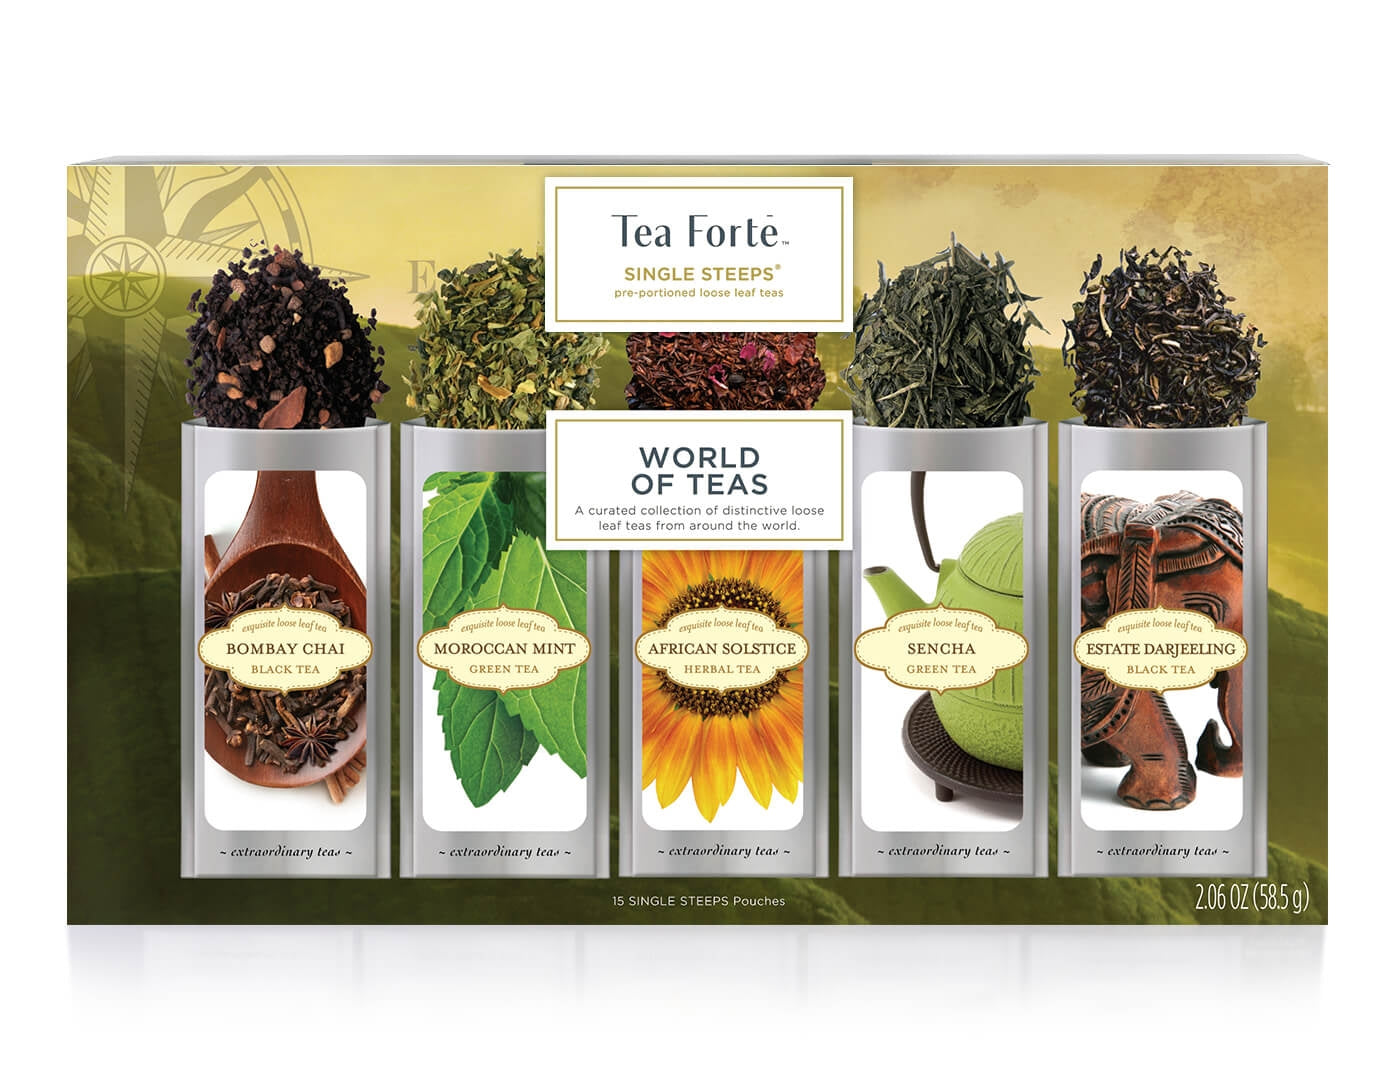 World of Teas tea assortment 15 count box of Single Steeps pouches - view of box top